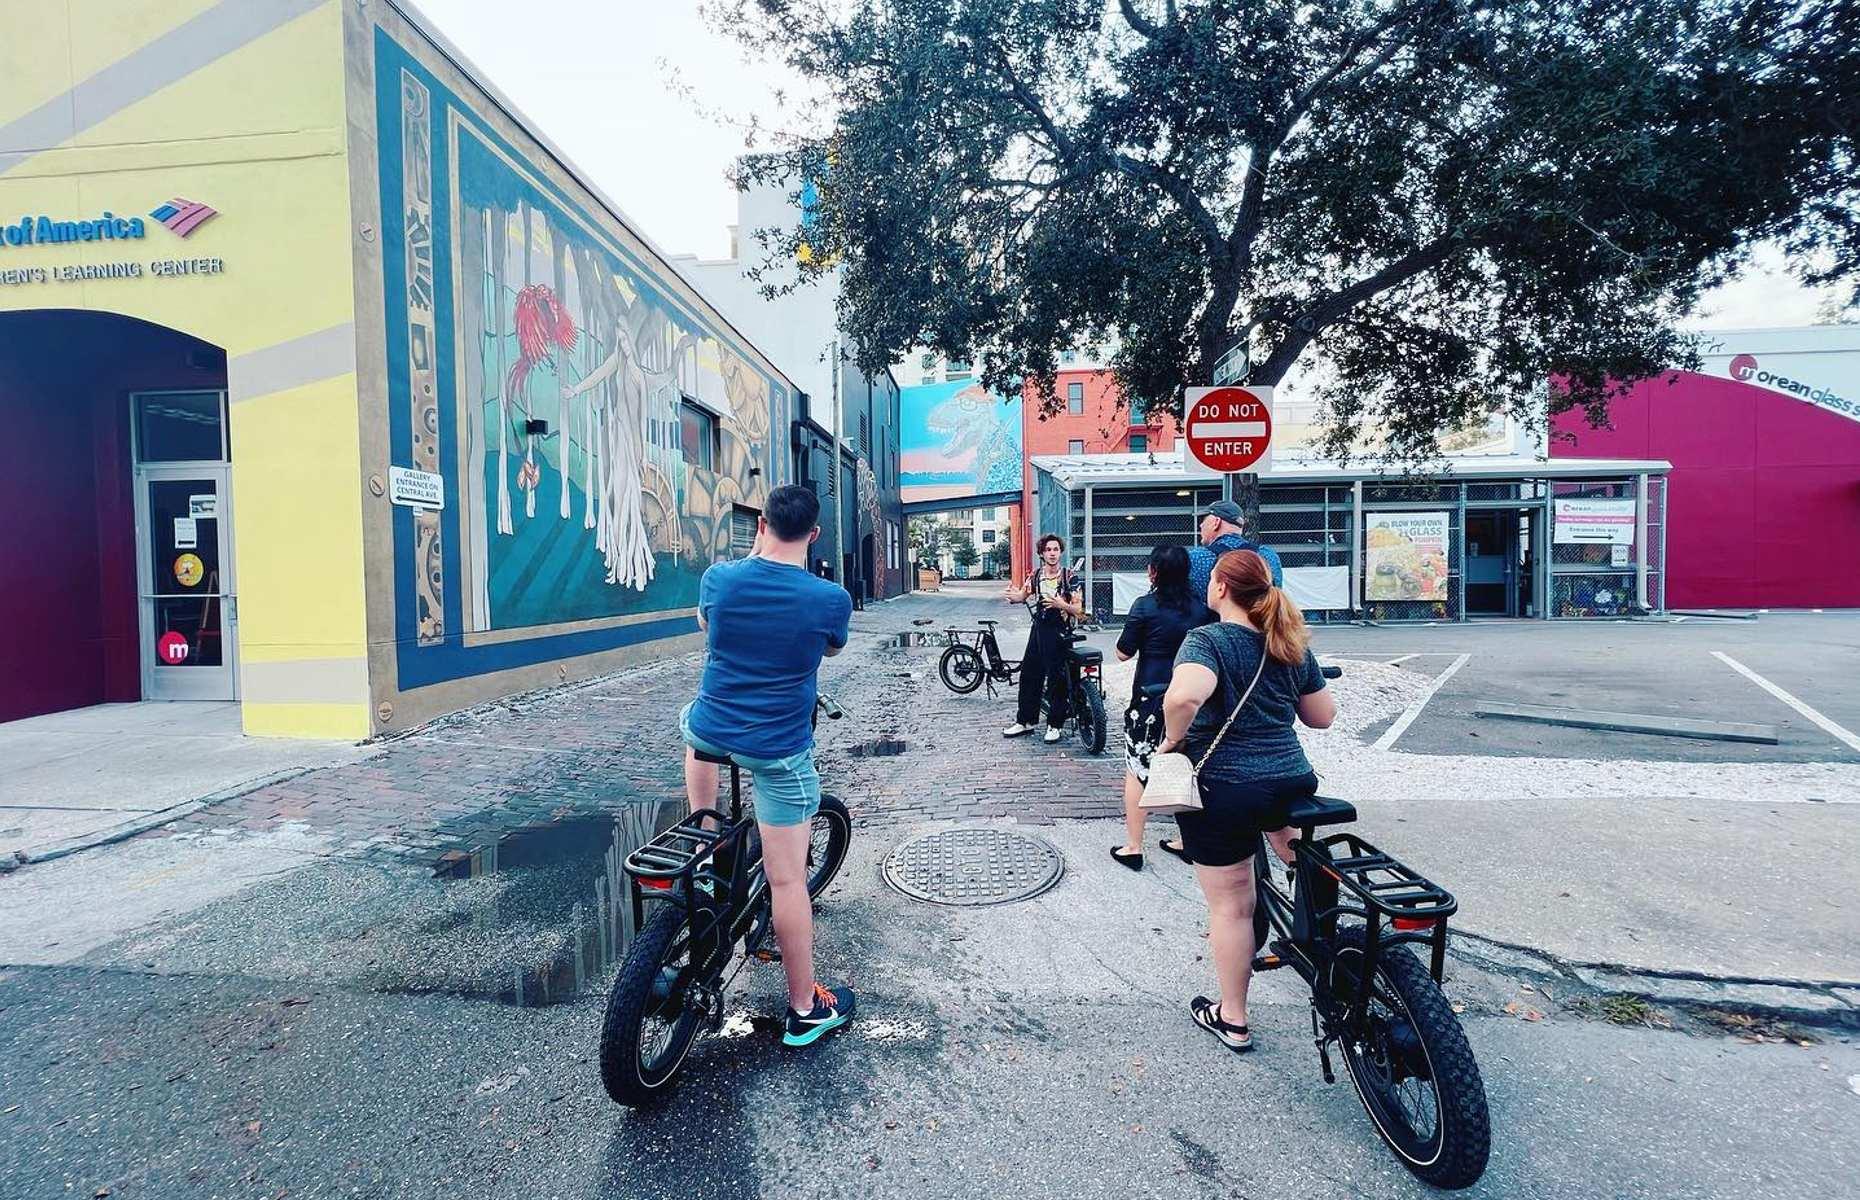 <p>Tucked between the Gulf of Mexico and Tampa Bay, St Petersburg is one of Florida’s most charming cities and it’s perfect for some pedal-powered adventures. <a href="https://www.bayebikes.com/">With Bay E-Bikes’ downtown tour</a>, a local expert will take you around the city’s most noteworthy attractions, including colorful murals, waterfront parks and the recently completed St Pete Pier.</p>  <p><a href="https://www.loveexploring.com/guides/107142/tampa-bay-florida-america-hotels-restaurants-2021-holidays"><strong>Discover more about Tampa Bay and its surrounding areas here</strong></a></p>